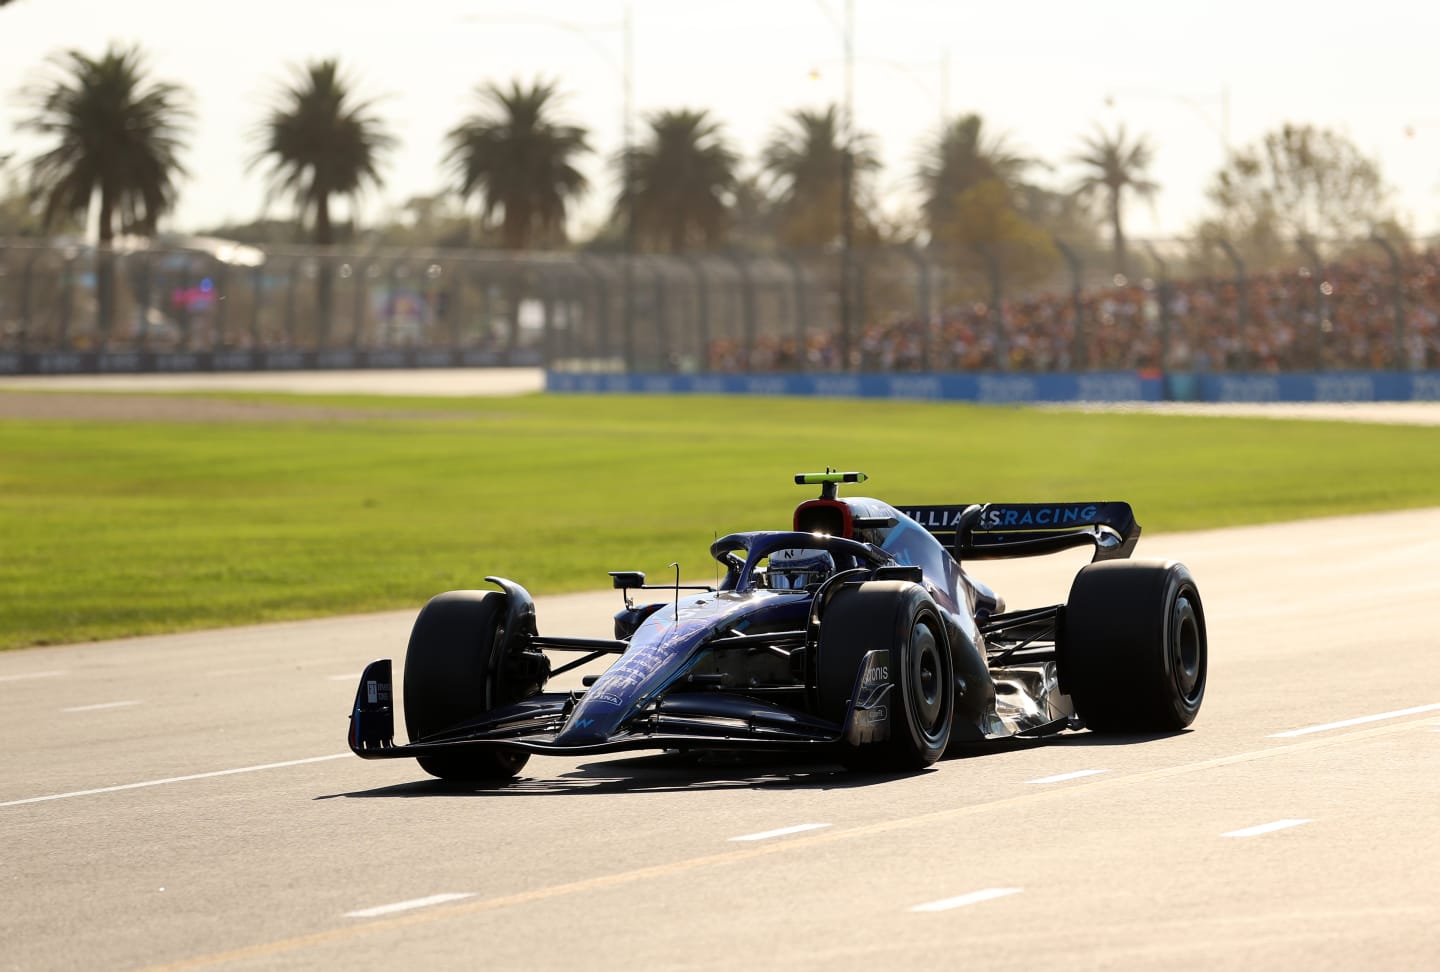 MELBOURNE, AUSTRALIA - APRIL 10: Nicholas Latifi of Canada driving the (6) Williams FW44 Mercedes on track during the F1 Grand Prix of Australia at Melbourne Grand Prix Circuit on April 10, 2022 in Melbourne, Australia. (Photo by Robert Cianflone/Getty Images)